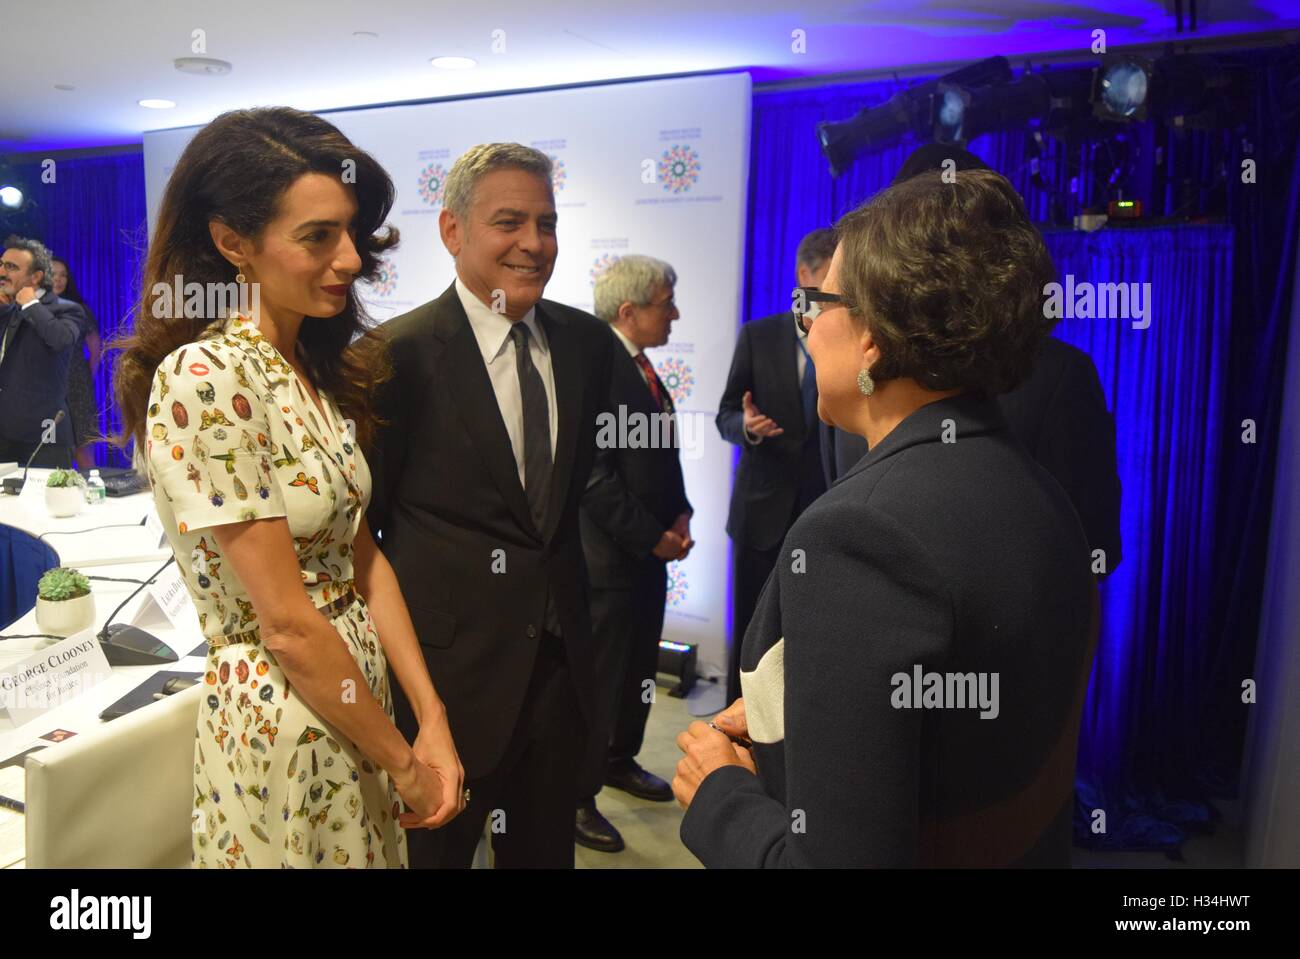 Actor George Clooney and wife Amal Alamuddin (L) chat with U.S. Commerce Secretary Penny Pritzker (R) before the start of a Roundtable Summit for Refugees at the United Nations September 20, 2016 in New York City, New York. Stock Photo